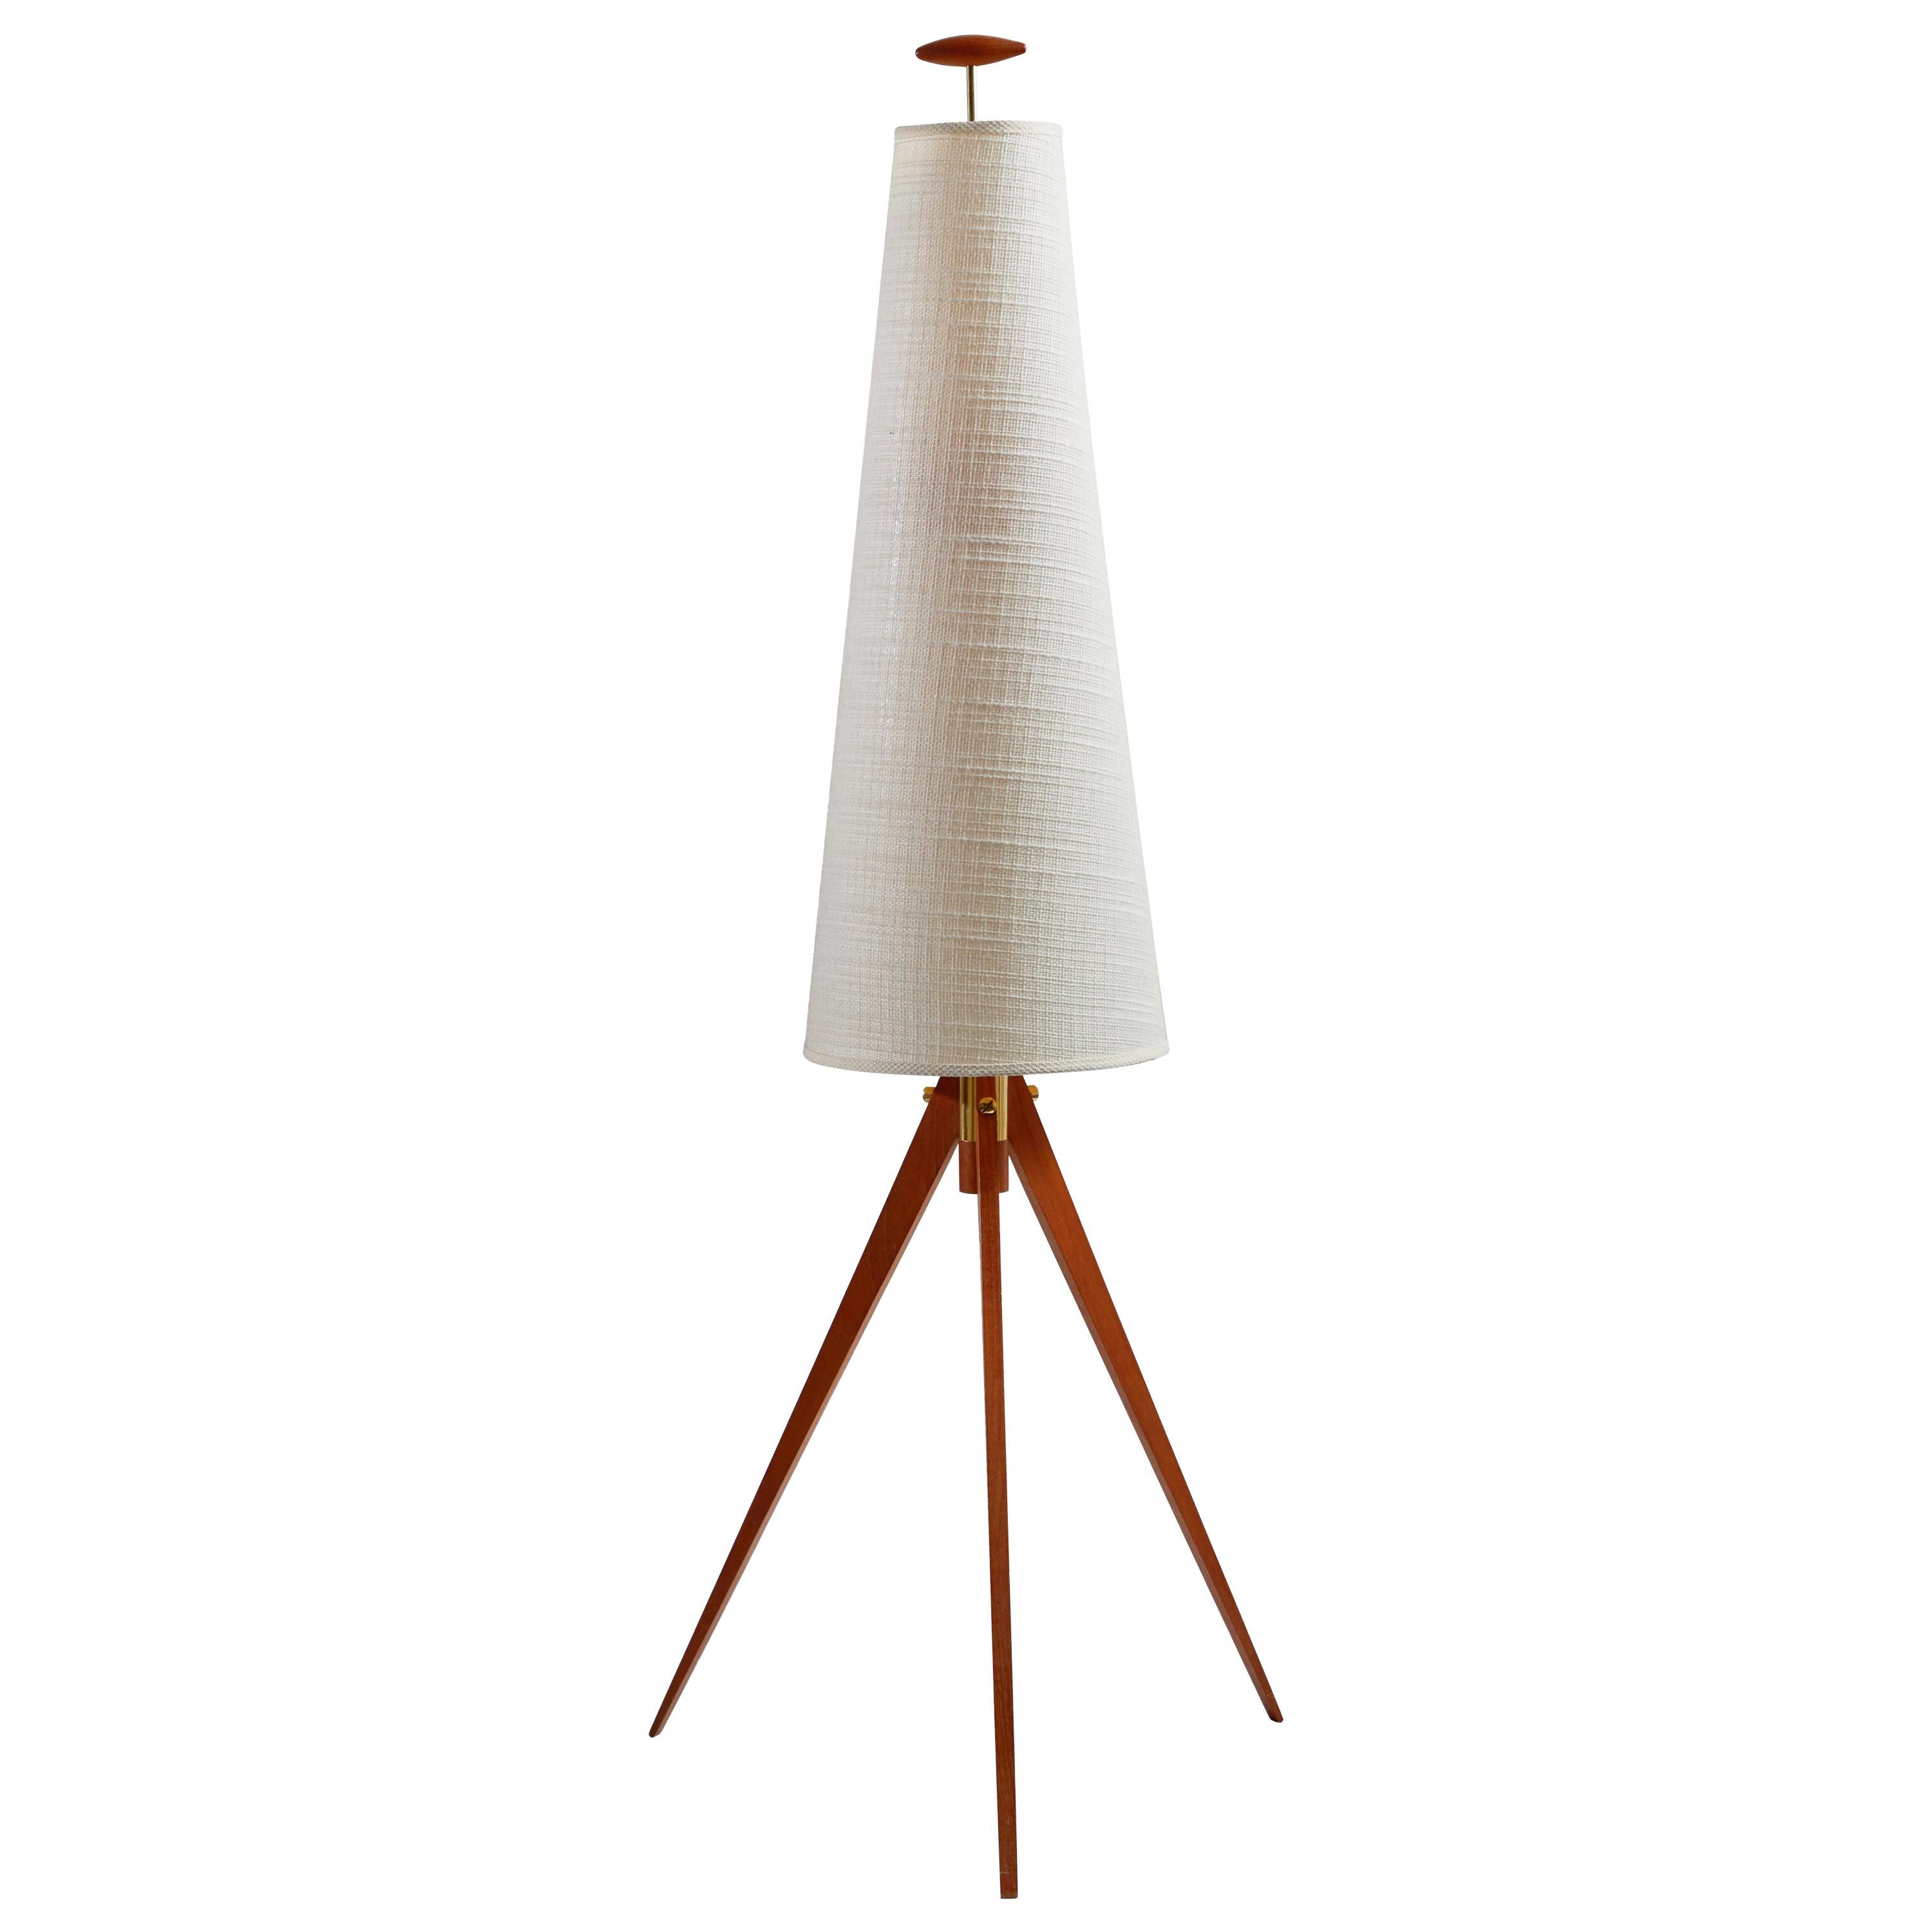 Floor Lamp by Tr & Co.